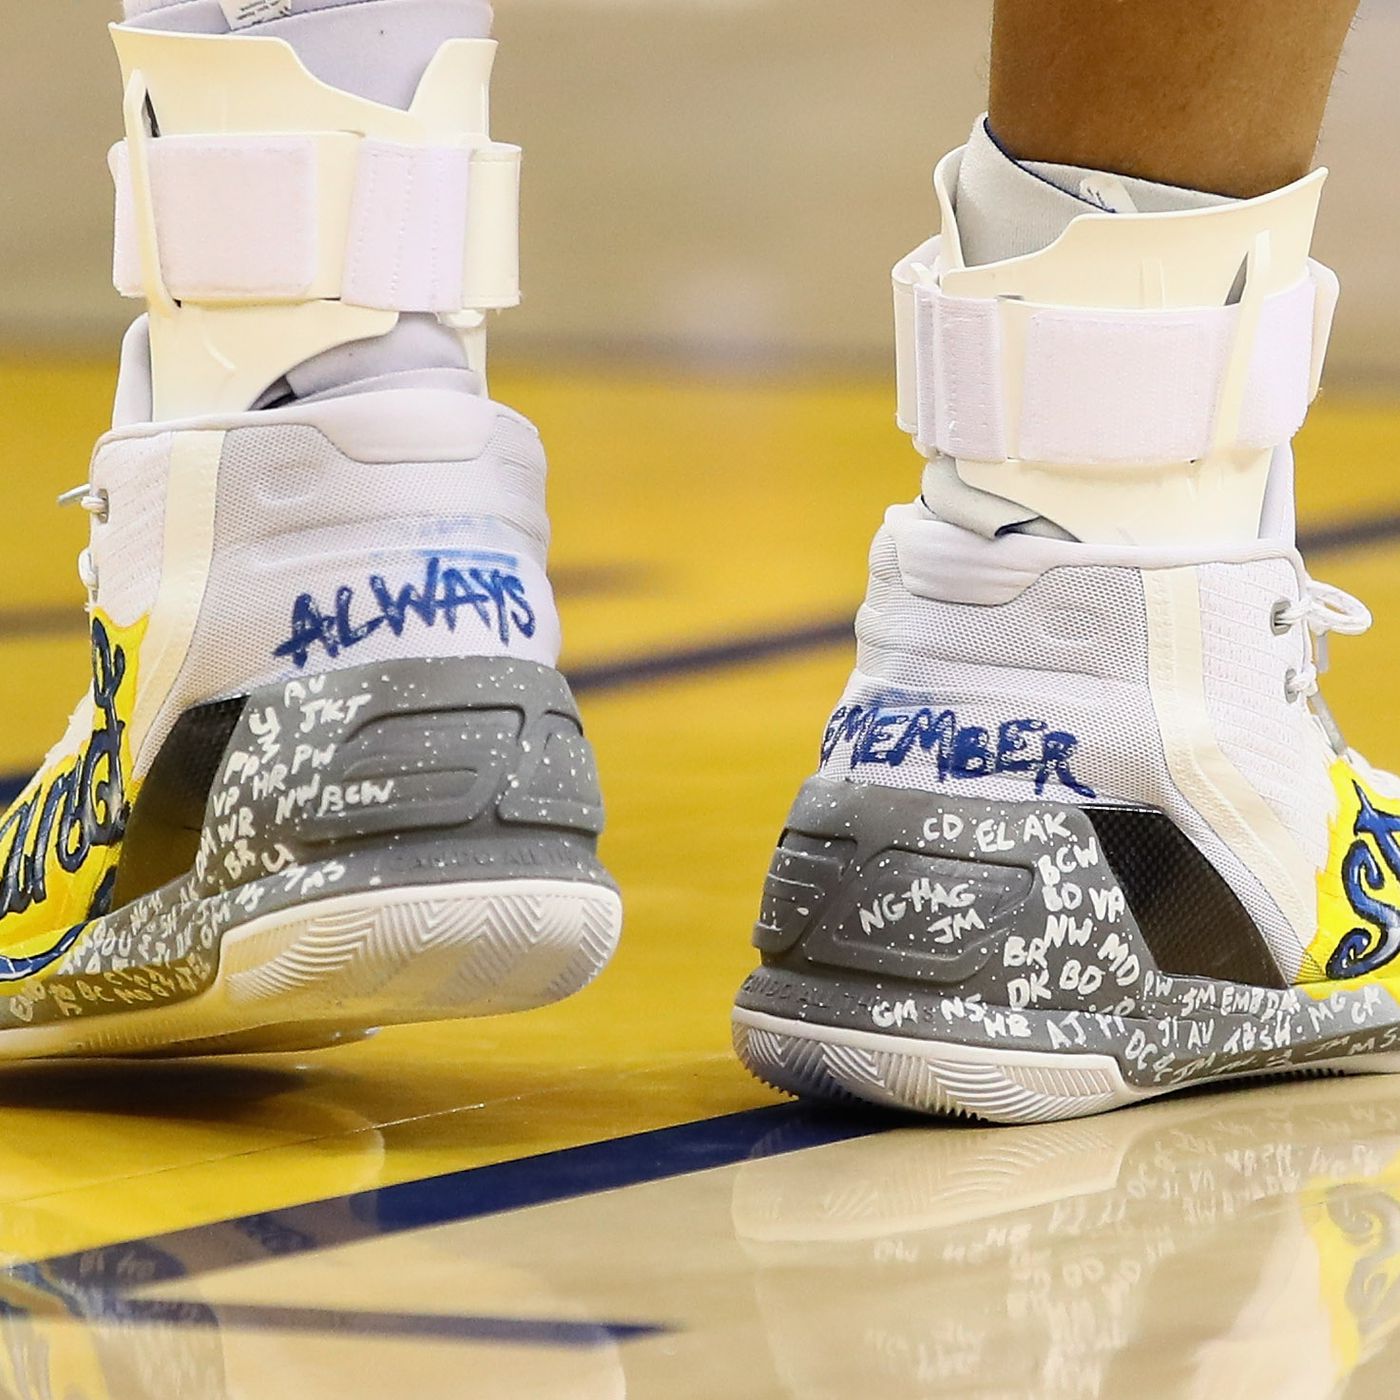 Auction of Stephen Curry's “Ghost Ship shoes” closes on Friday - Golden  State Of Mind